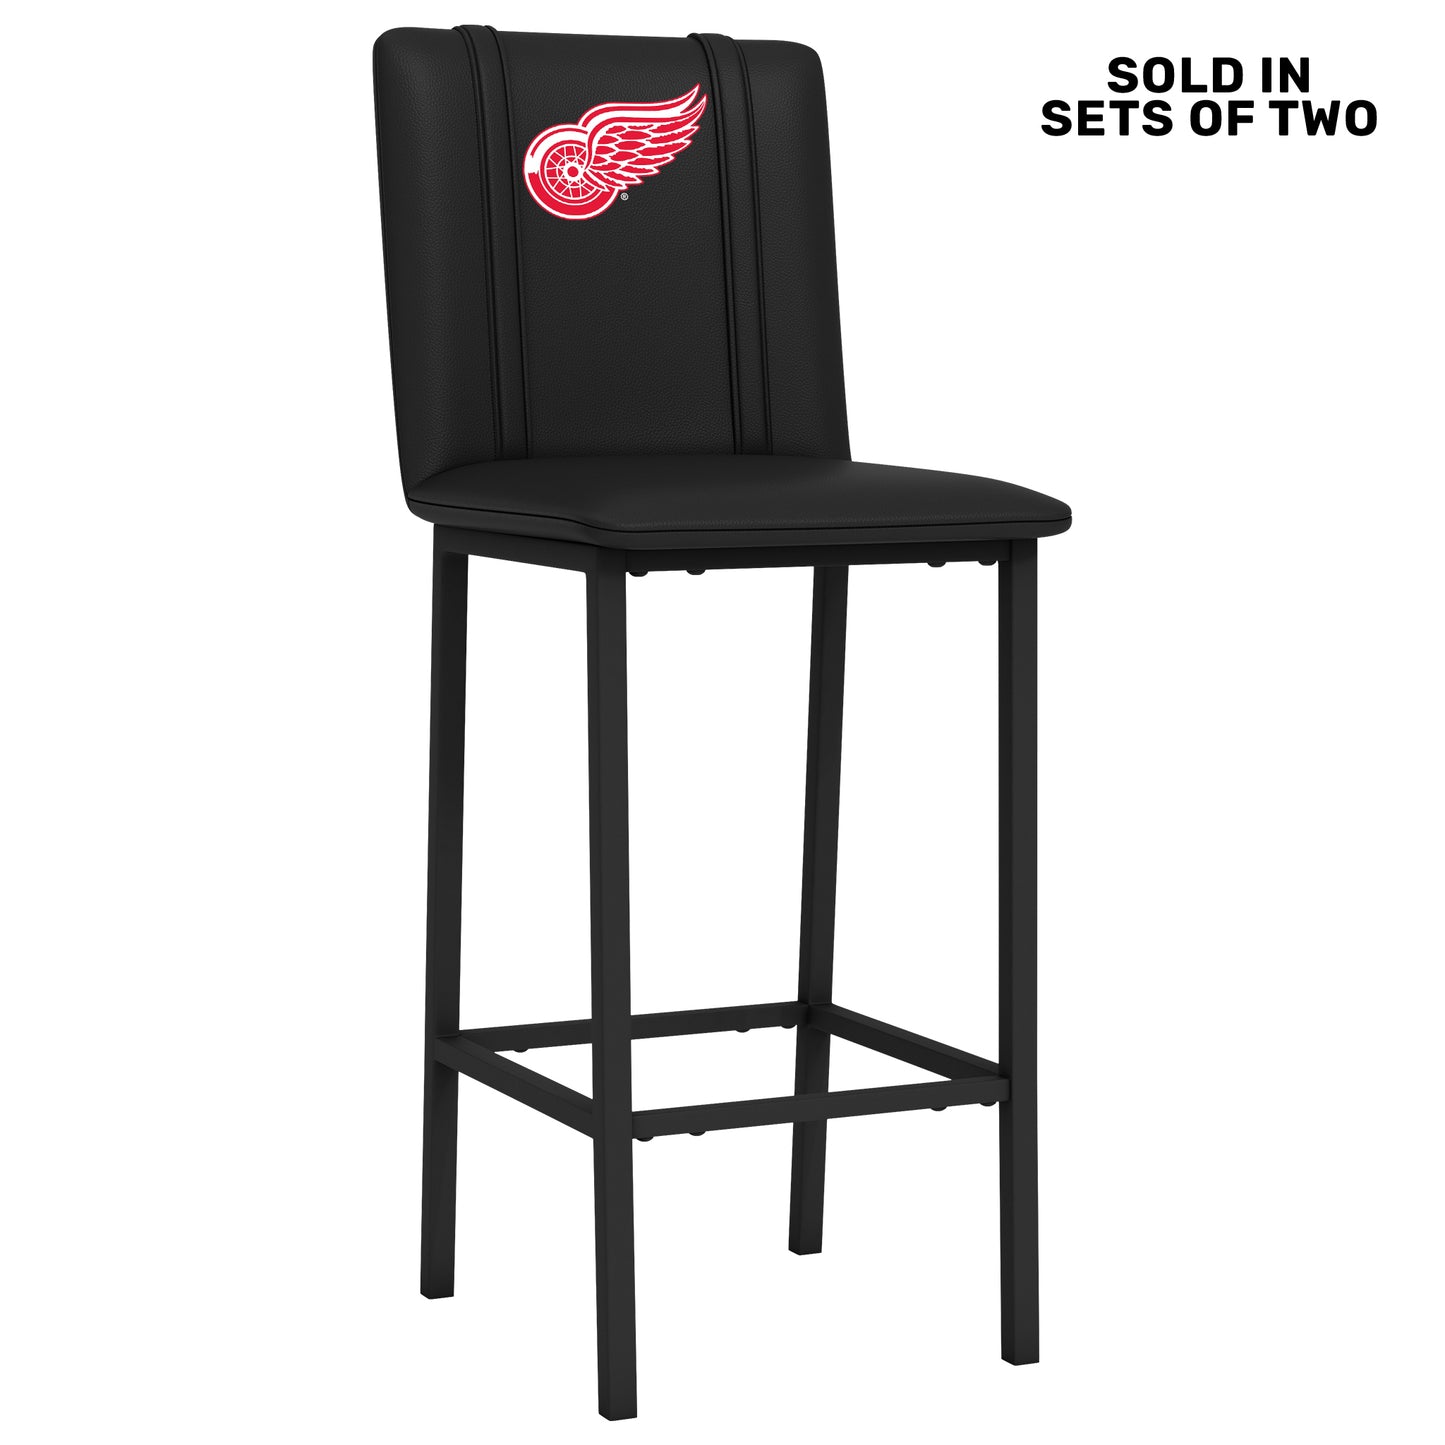 Bar Stool 500 with Detroit Red Wings Logo Set of 2